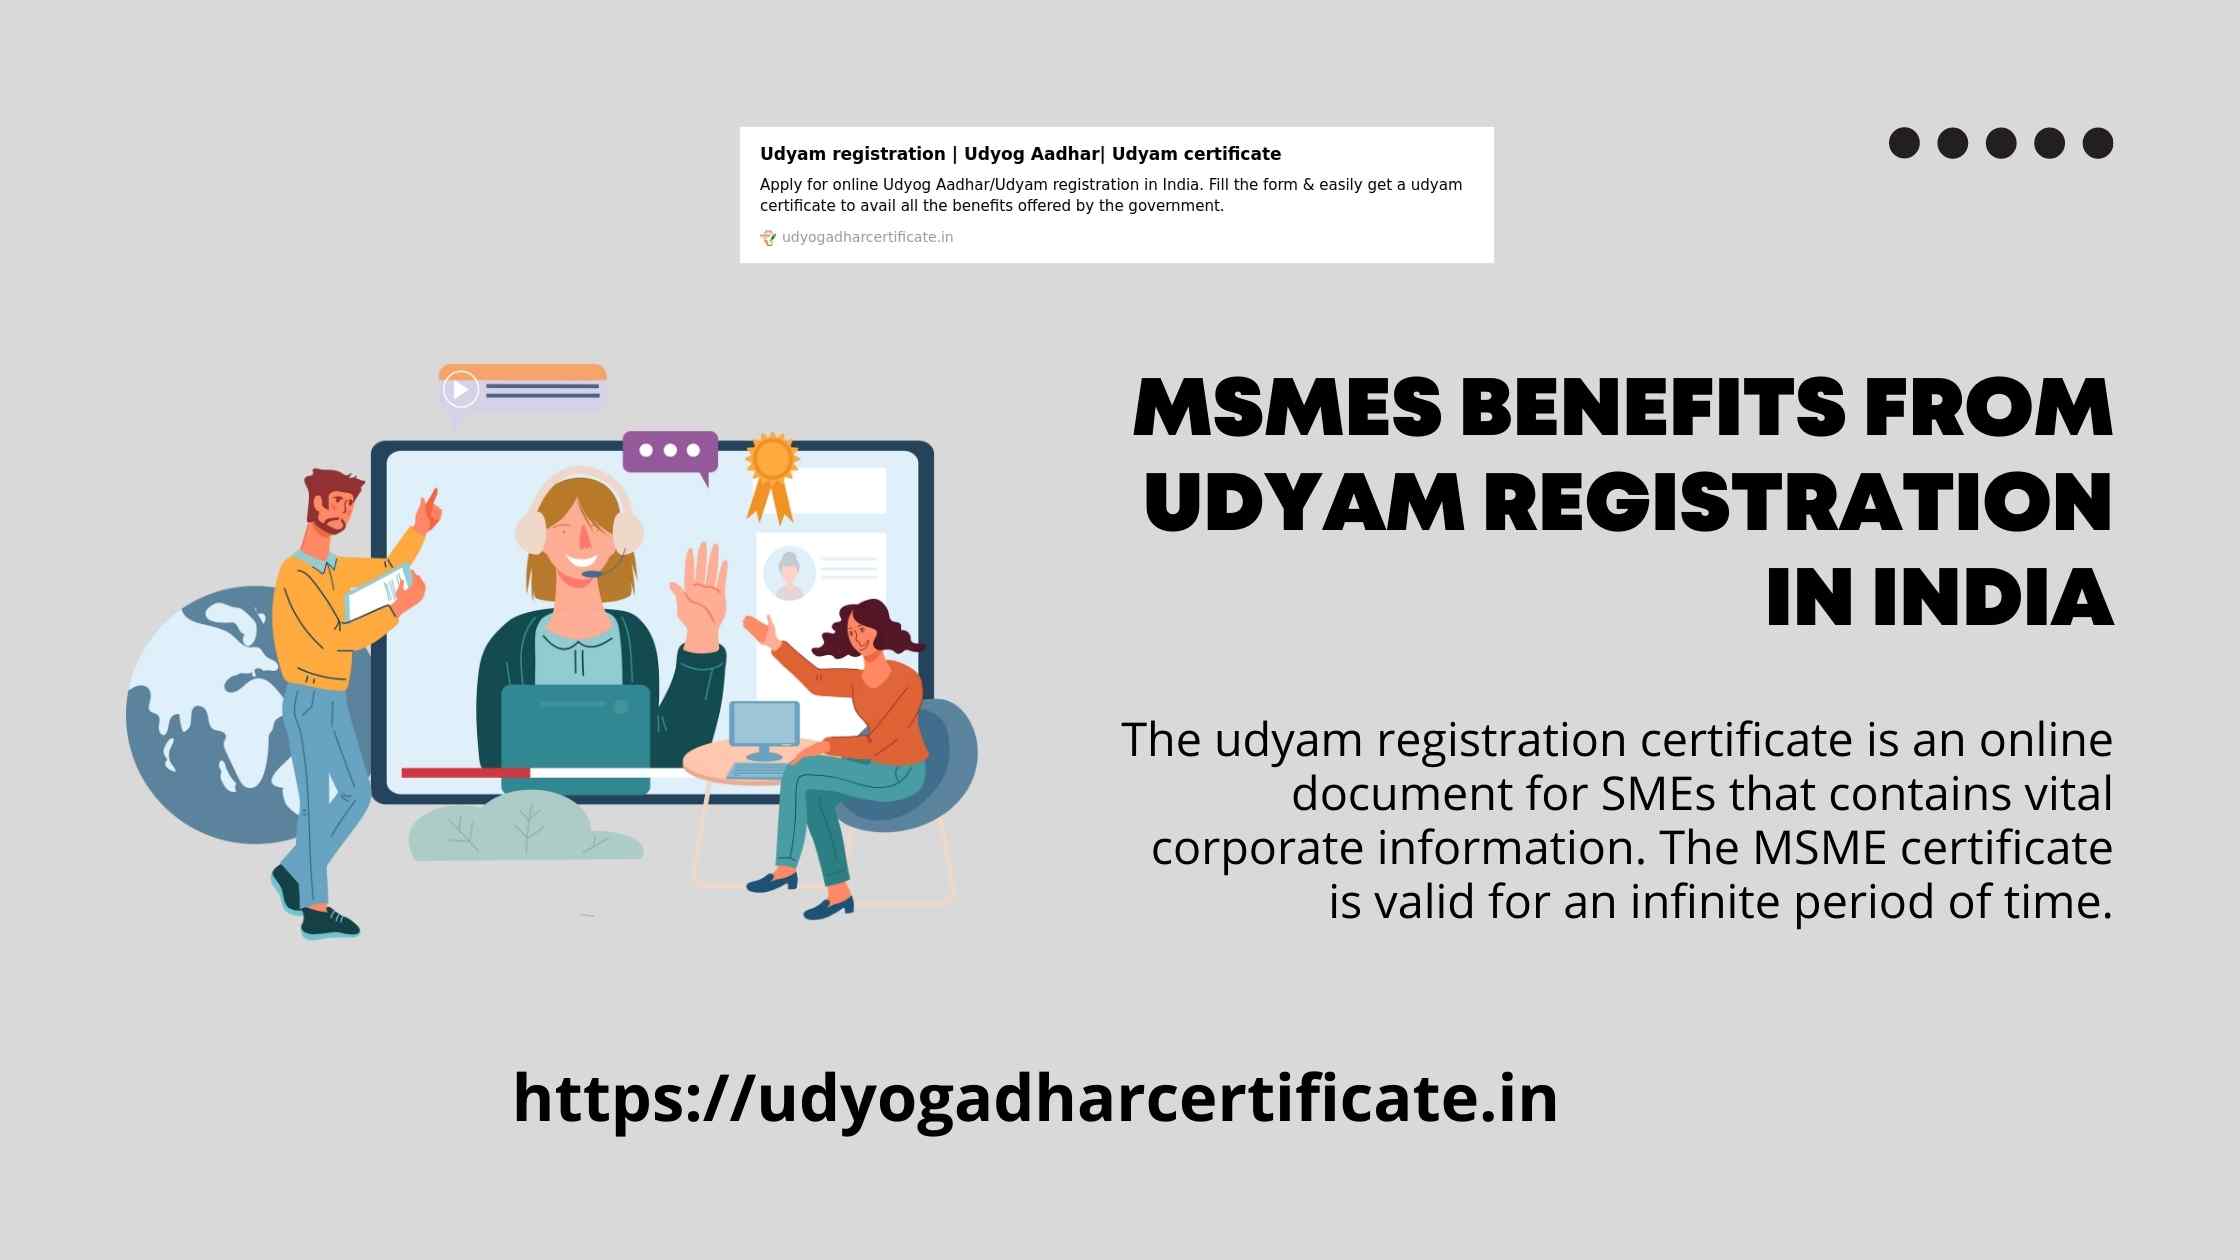 MSMEs Benefits from Udyam Registration in India